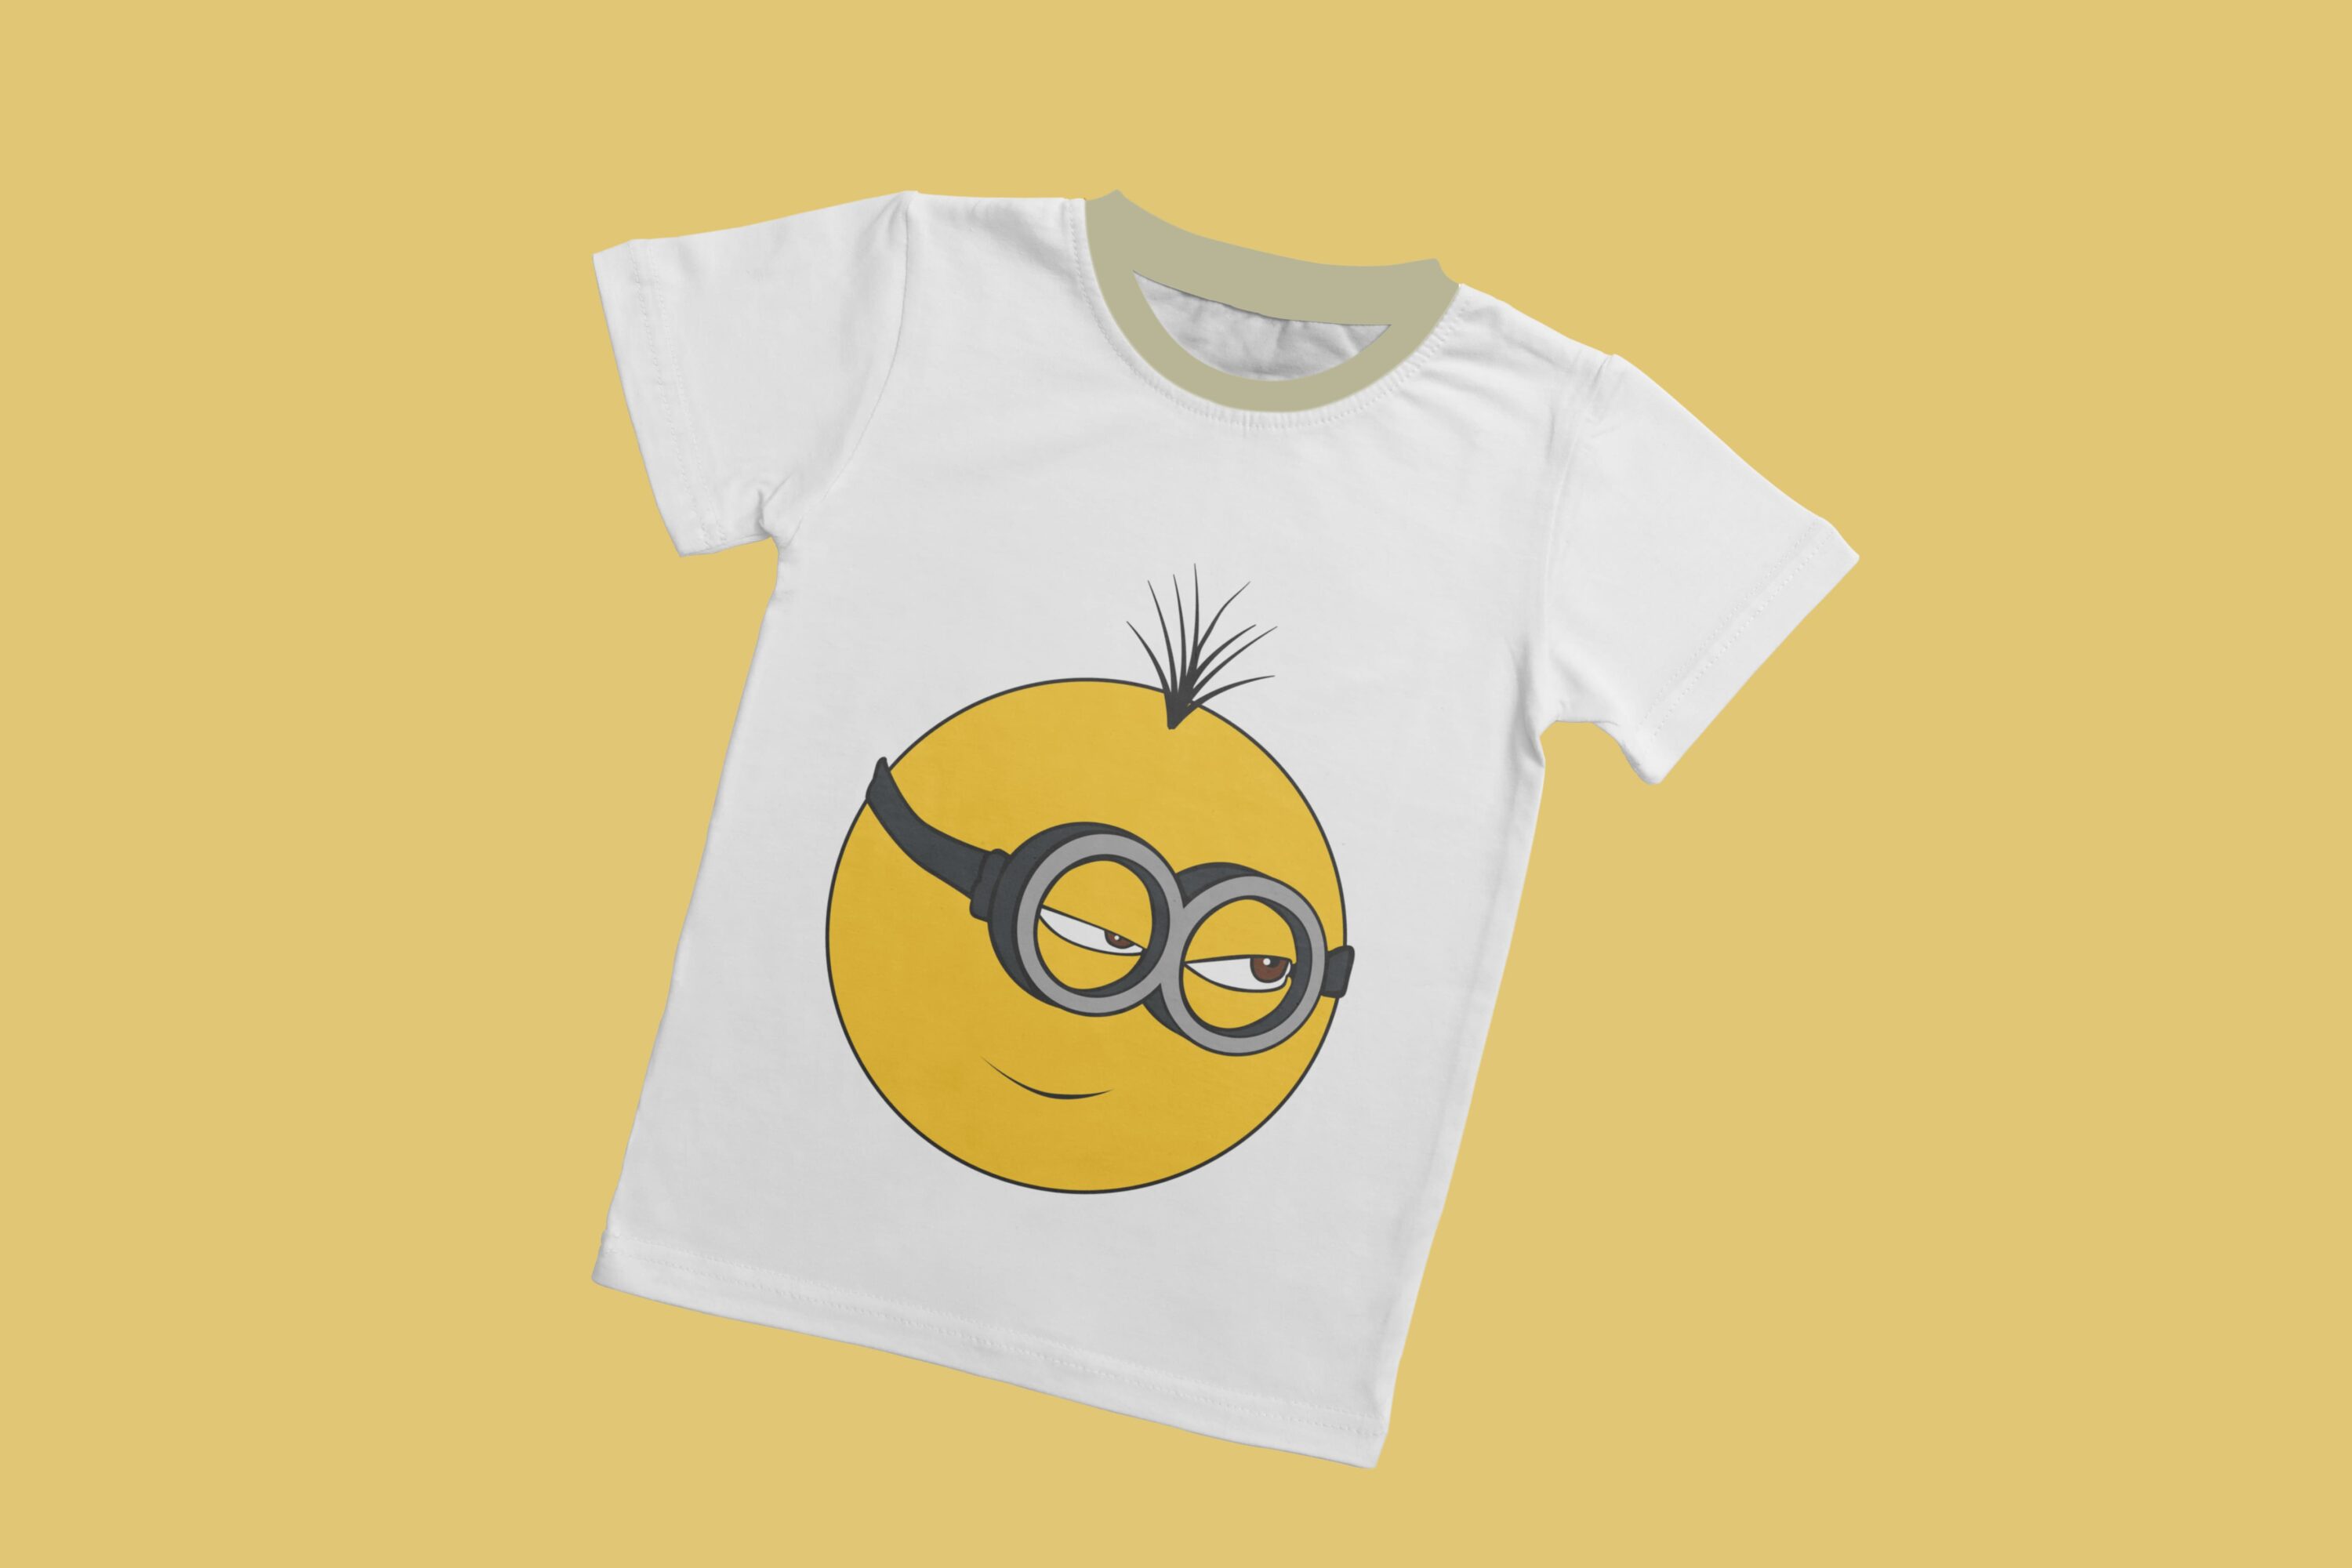 White T-shirt with a mint collar and a face of a grinning minion.